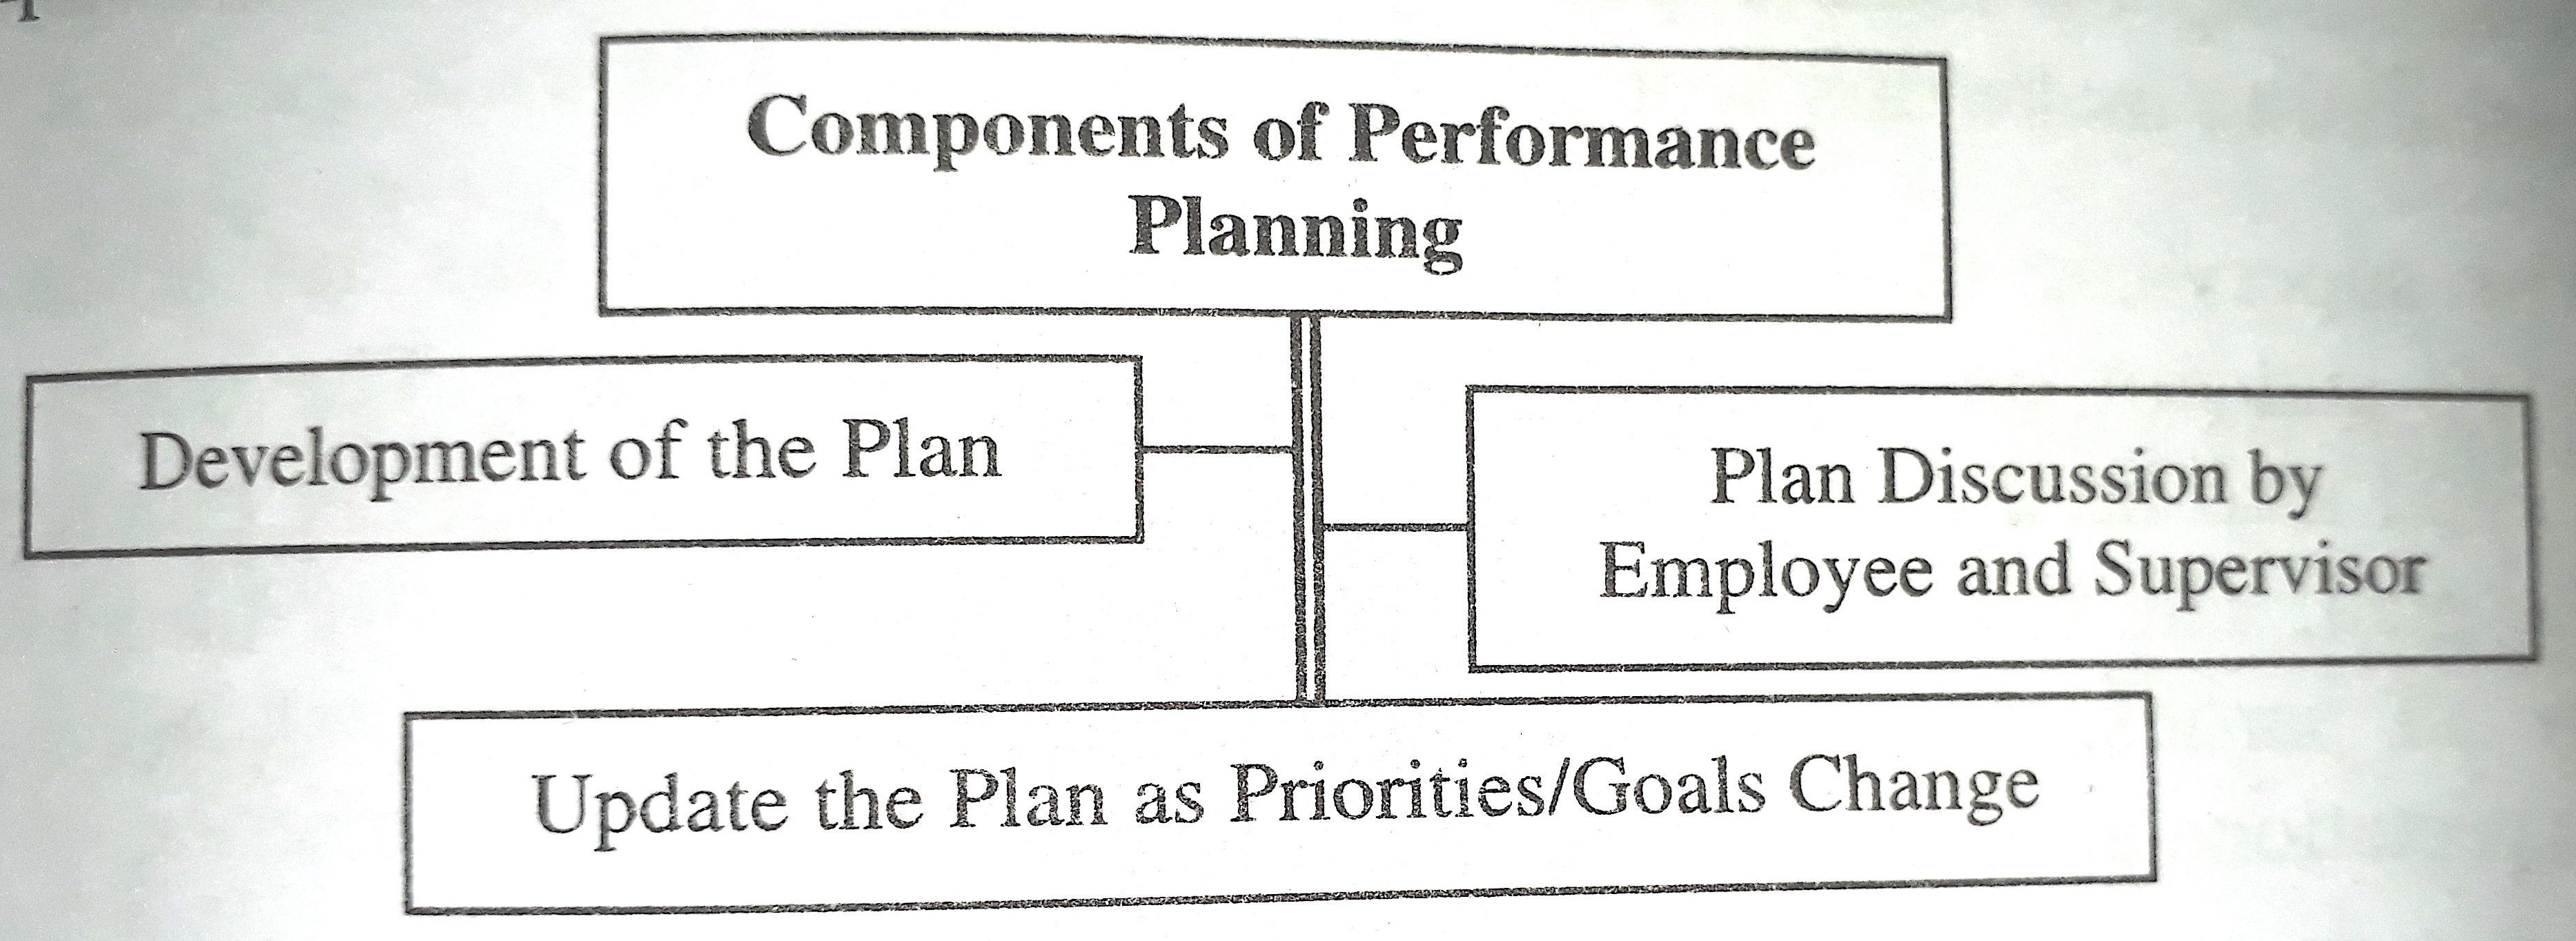 Components of Performance Planning